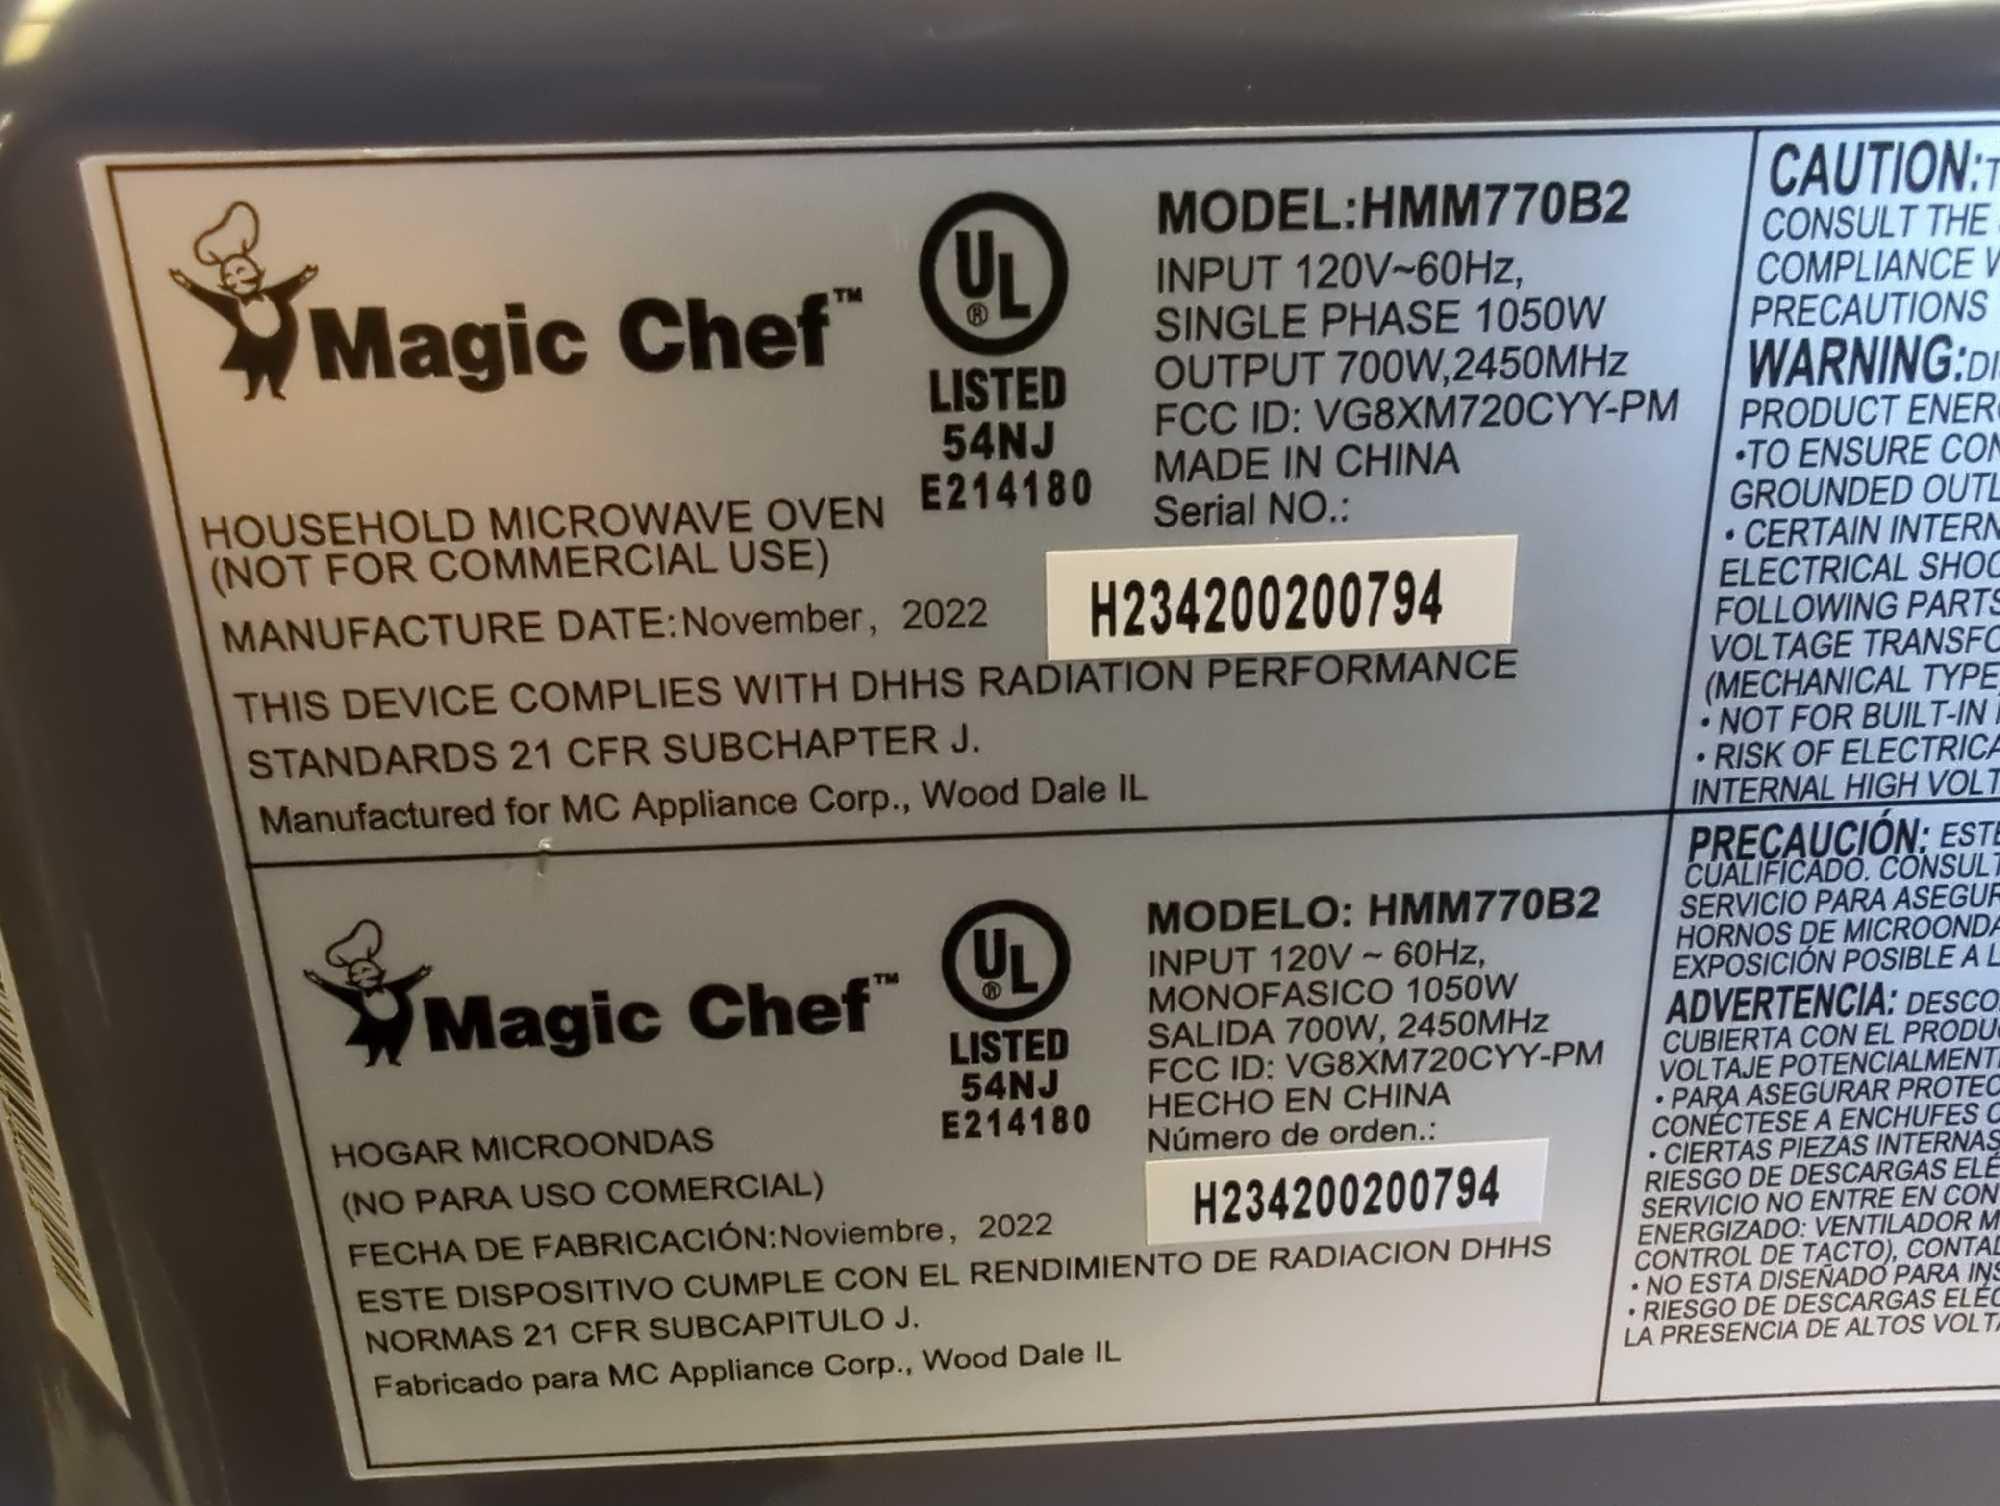 Magic Chef 0.7 cu. ft. 700-Watt Countertop Microwave in Black. It comes in open box. Appears to be